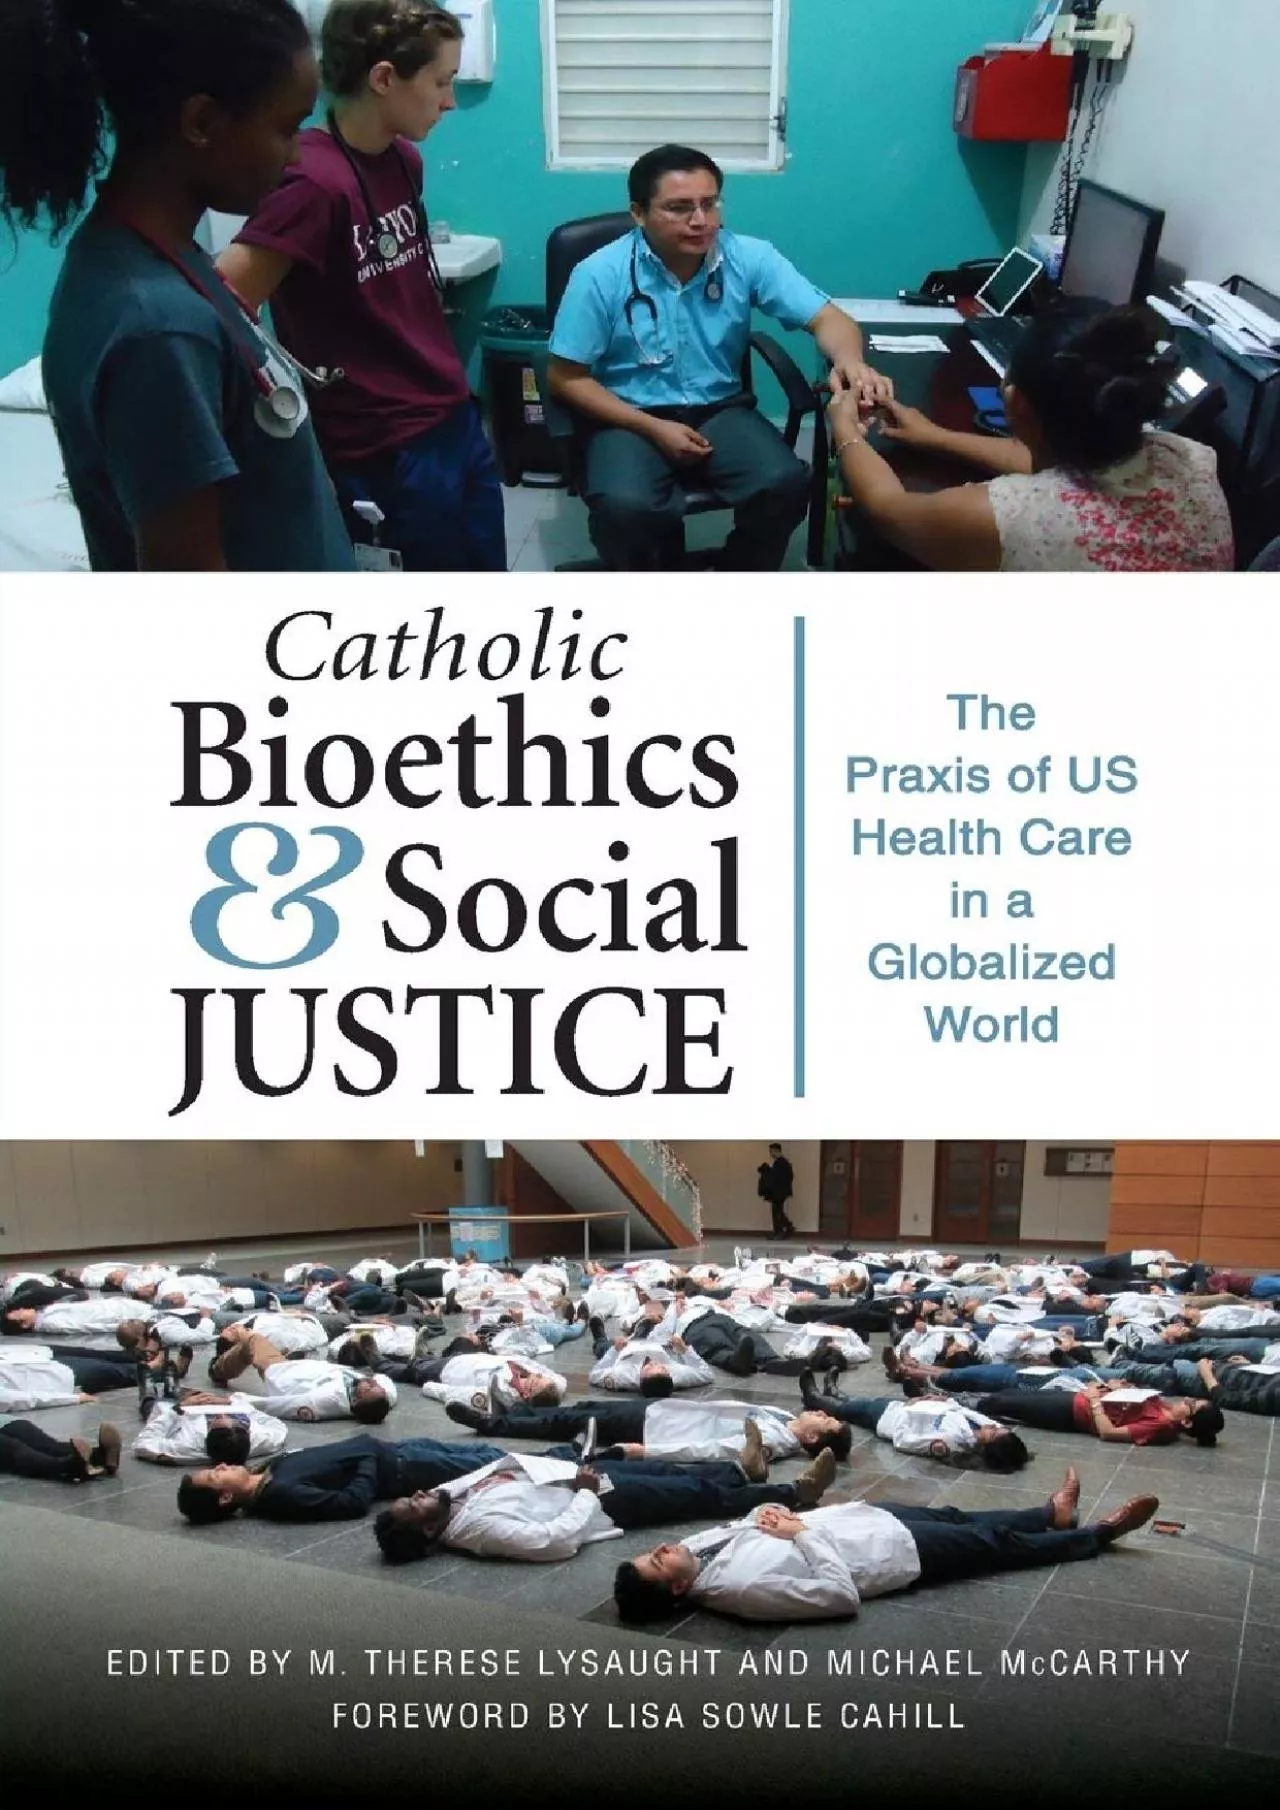 (BOOK)-Catholic Bioethics and Social Justice: The Praxis of US Health Care in a Globalized